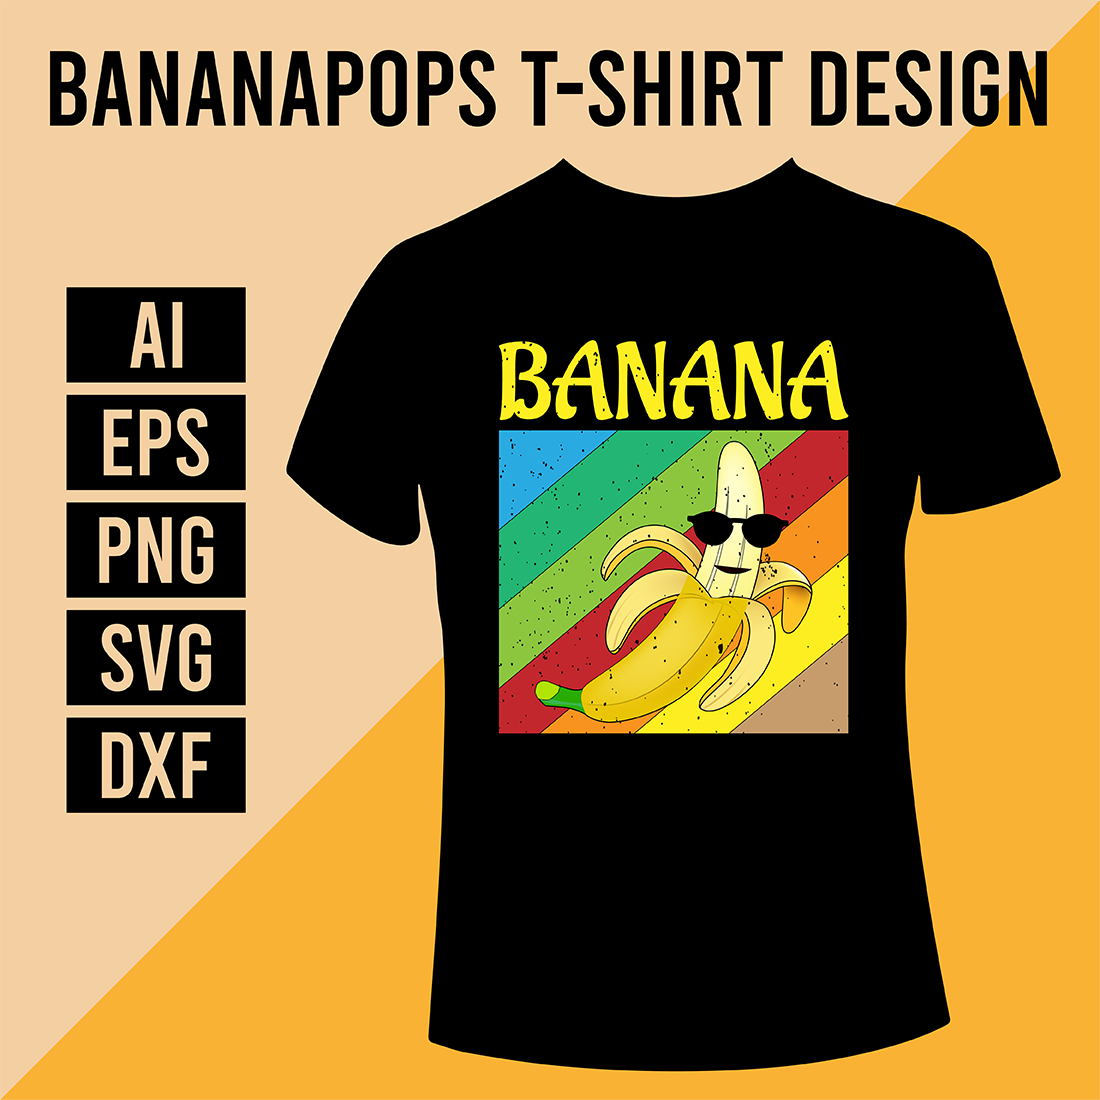 Bananapops T-Shirt Design cover image.